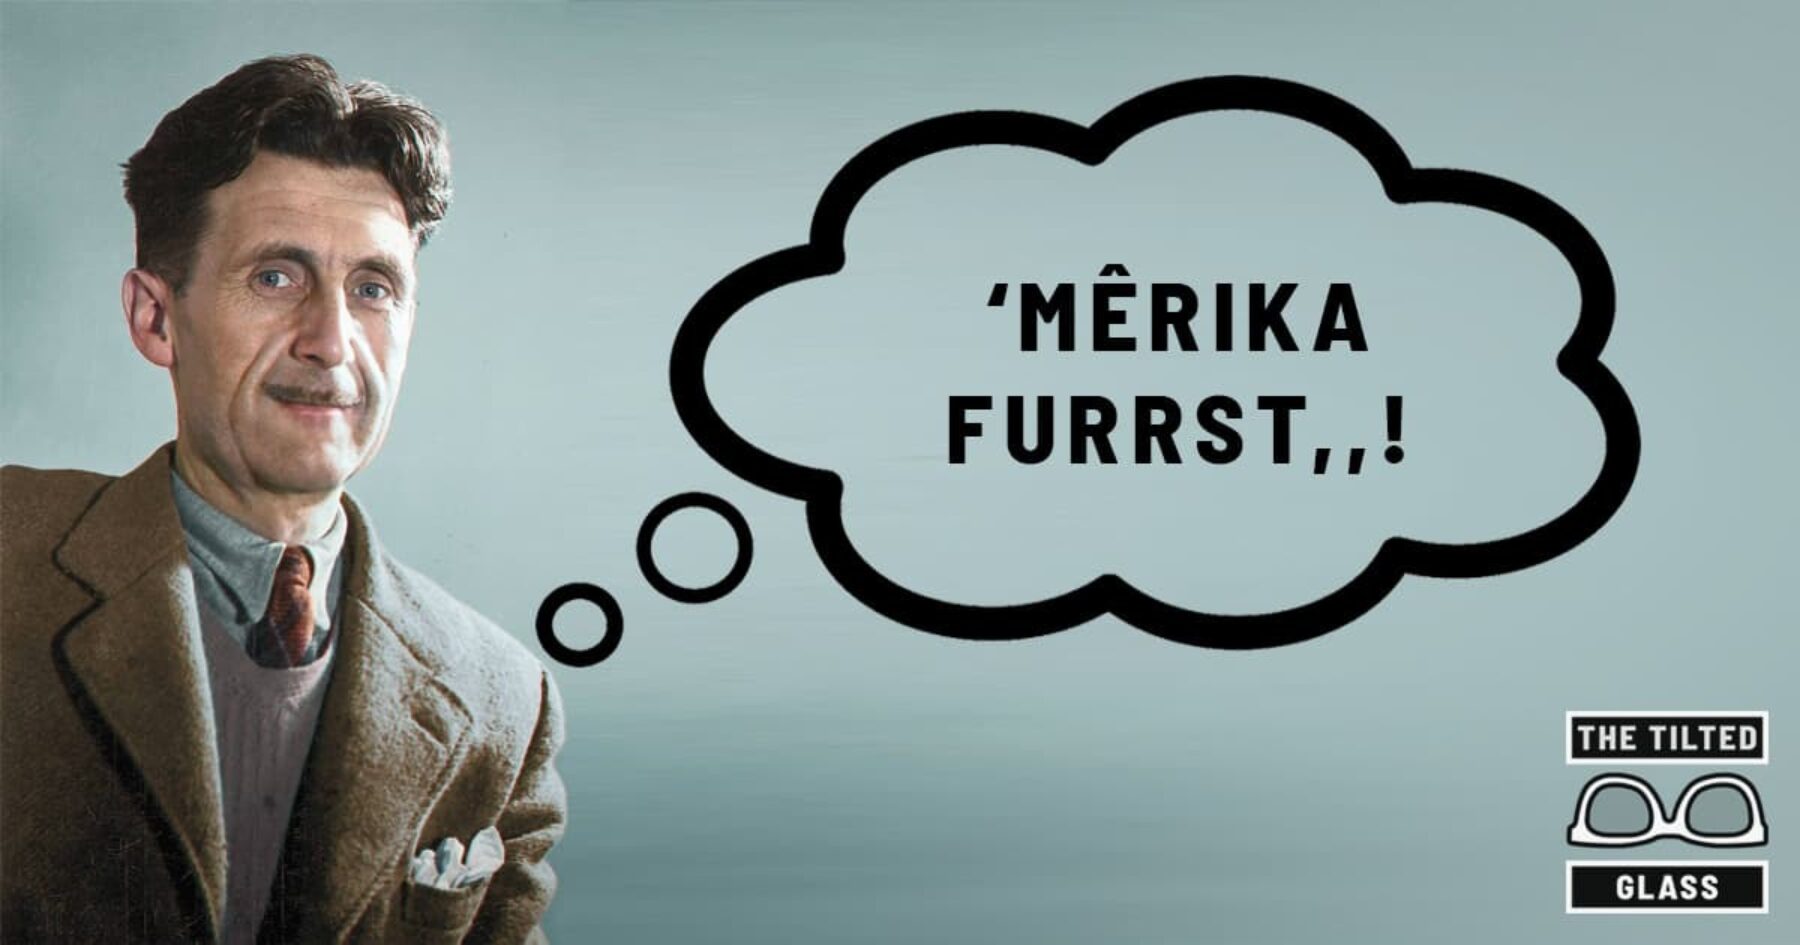 MÊRIKA FURRST,,! - Voting Guide for All of America's Elections